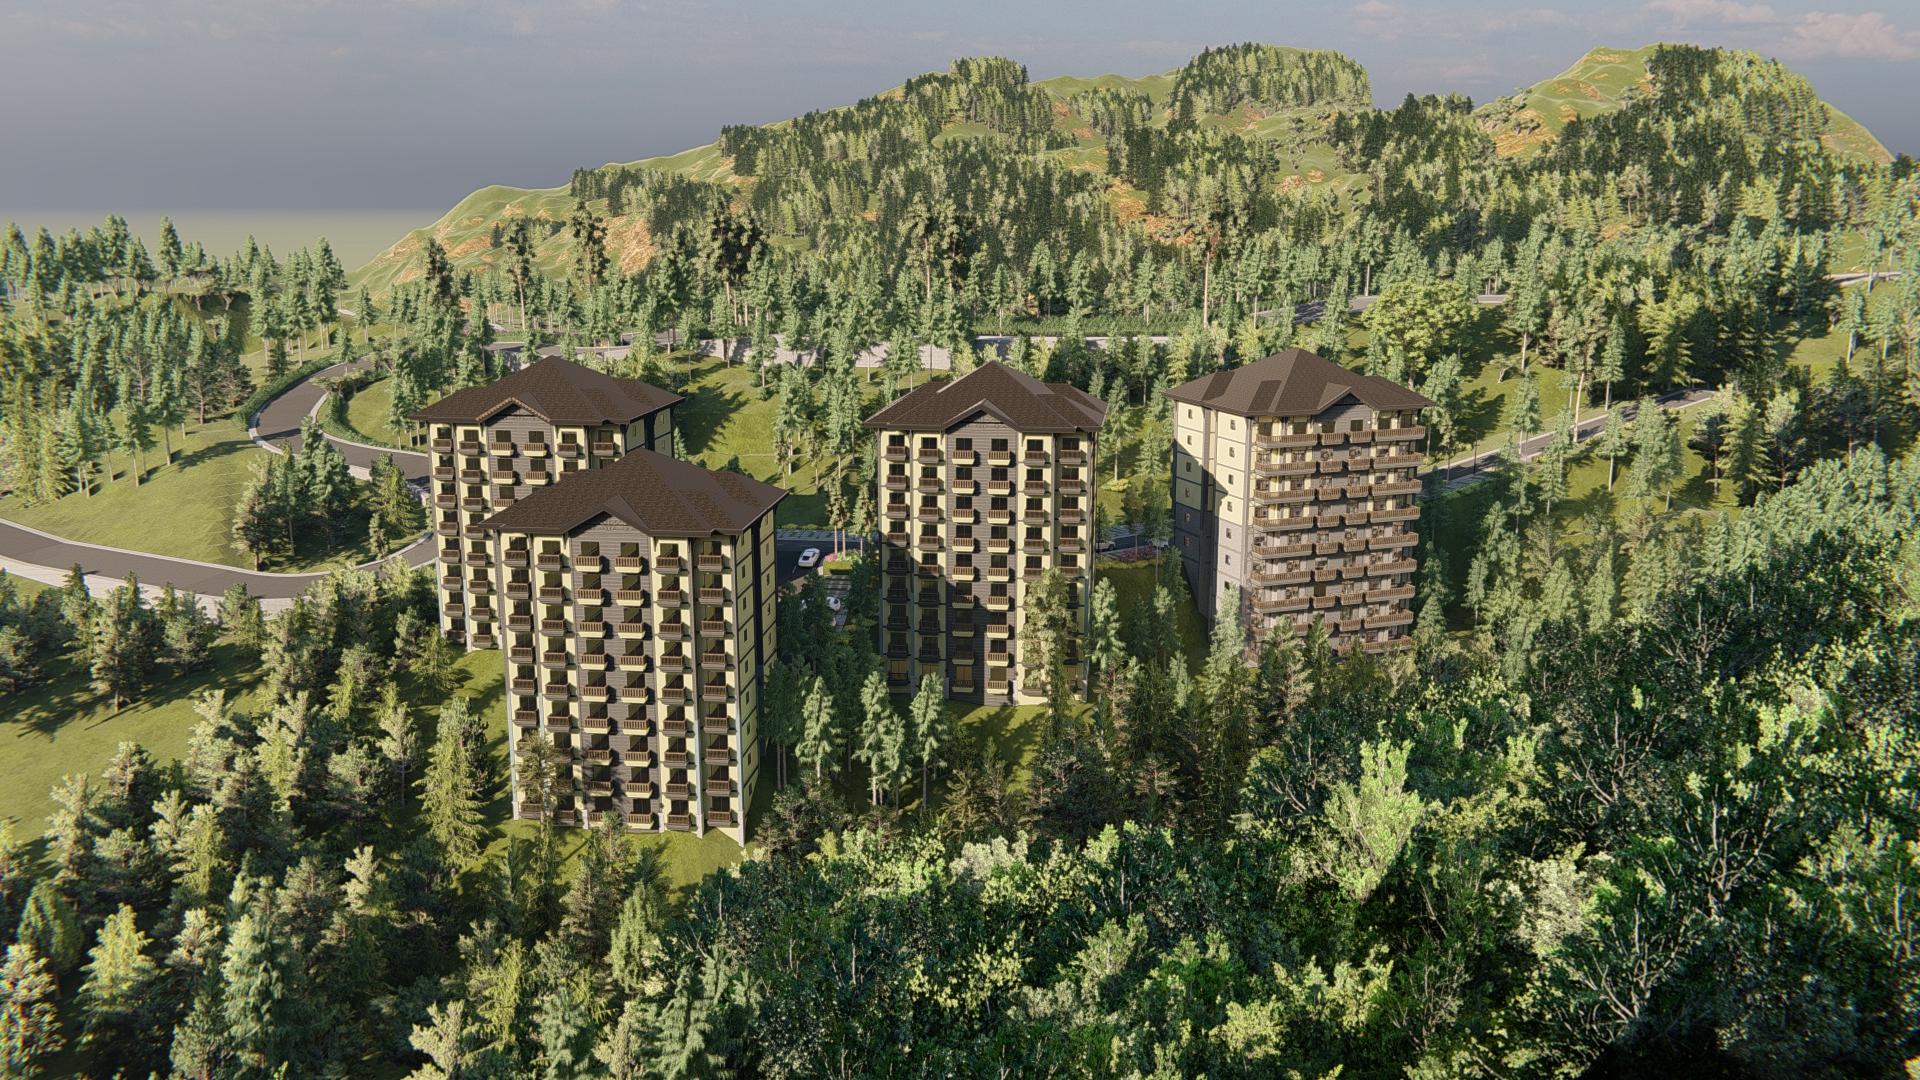 Alpine Villas in Crosswinds Tagaytay not only take pride in its architecture but in its environment and beautiful views as well.